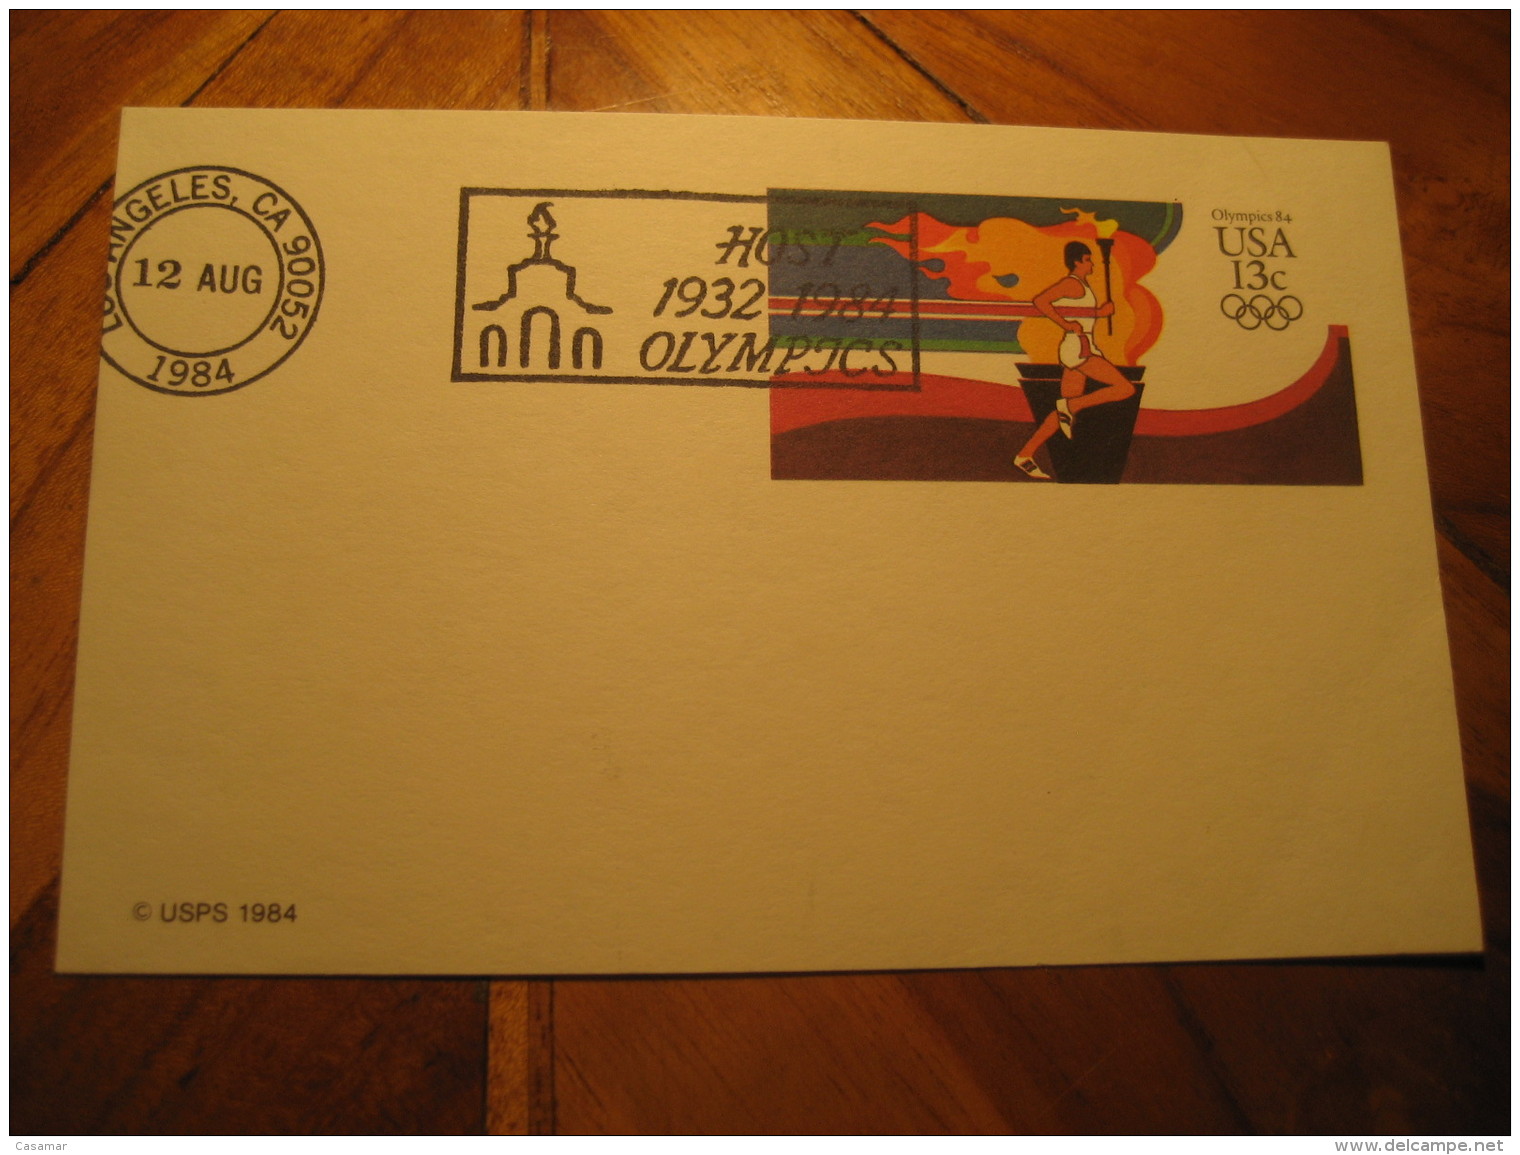 LOS ANGELES 1932 Olympic Games Olympics 1984 Torch Postal Stationery Card USA - Summer 1932: Los Angeles